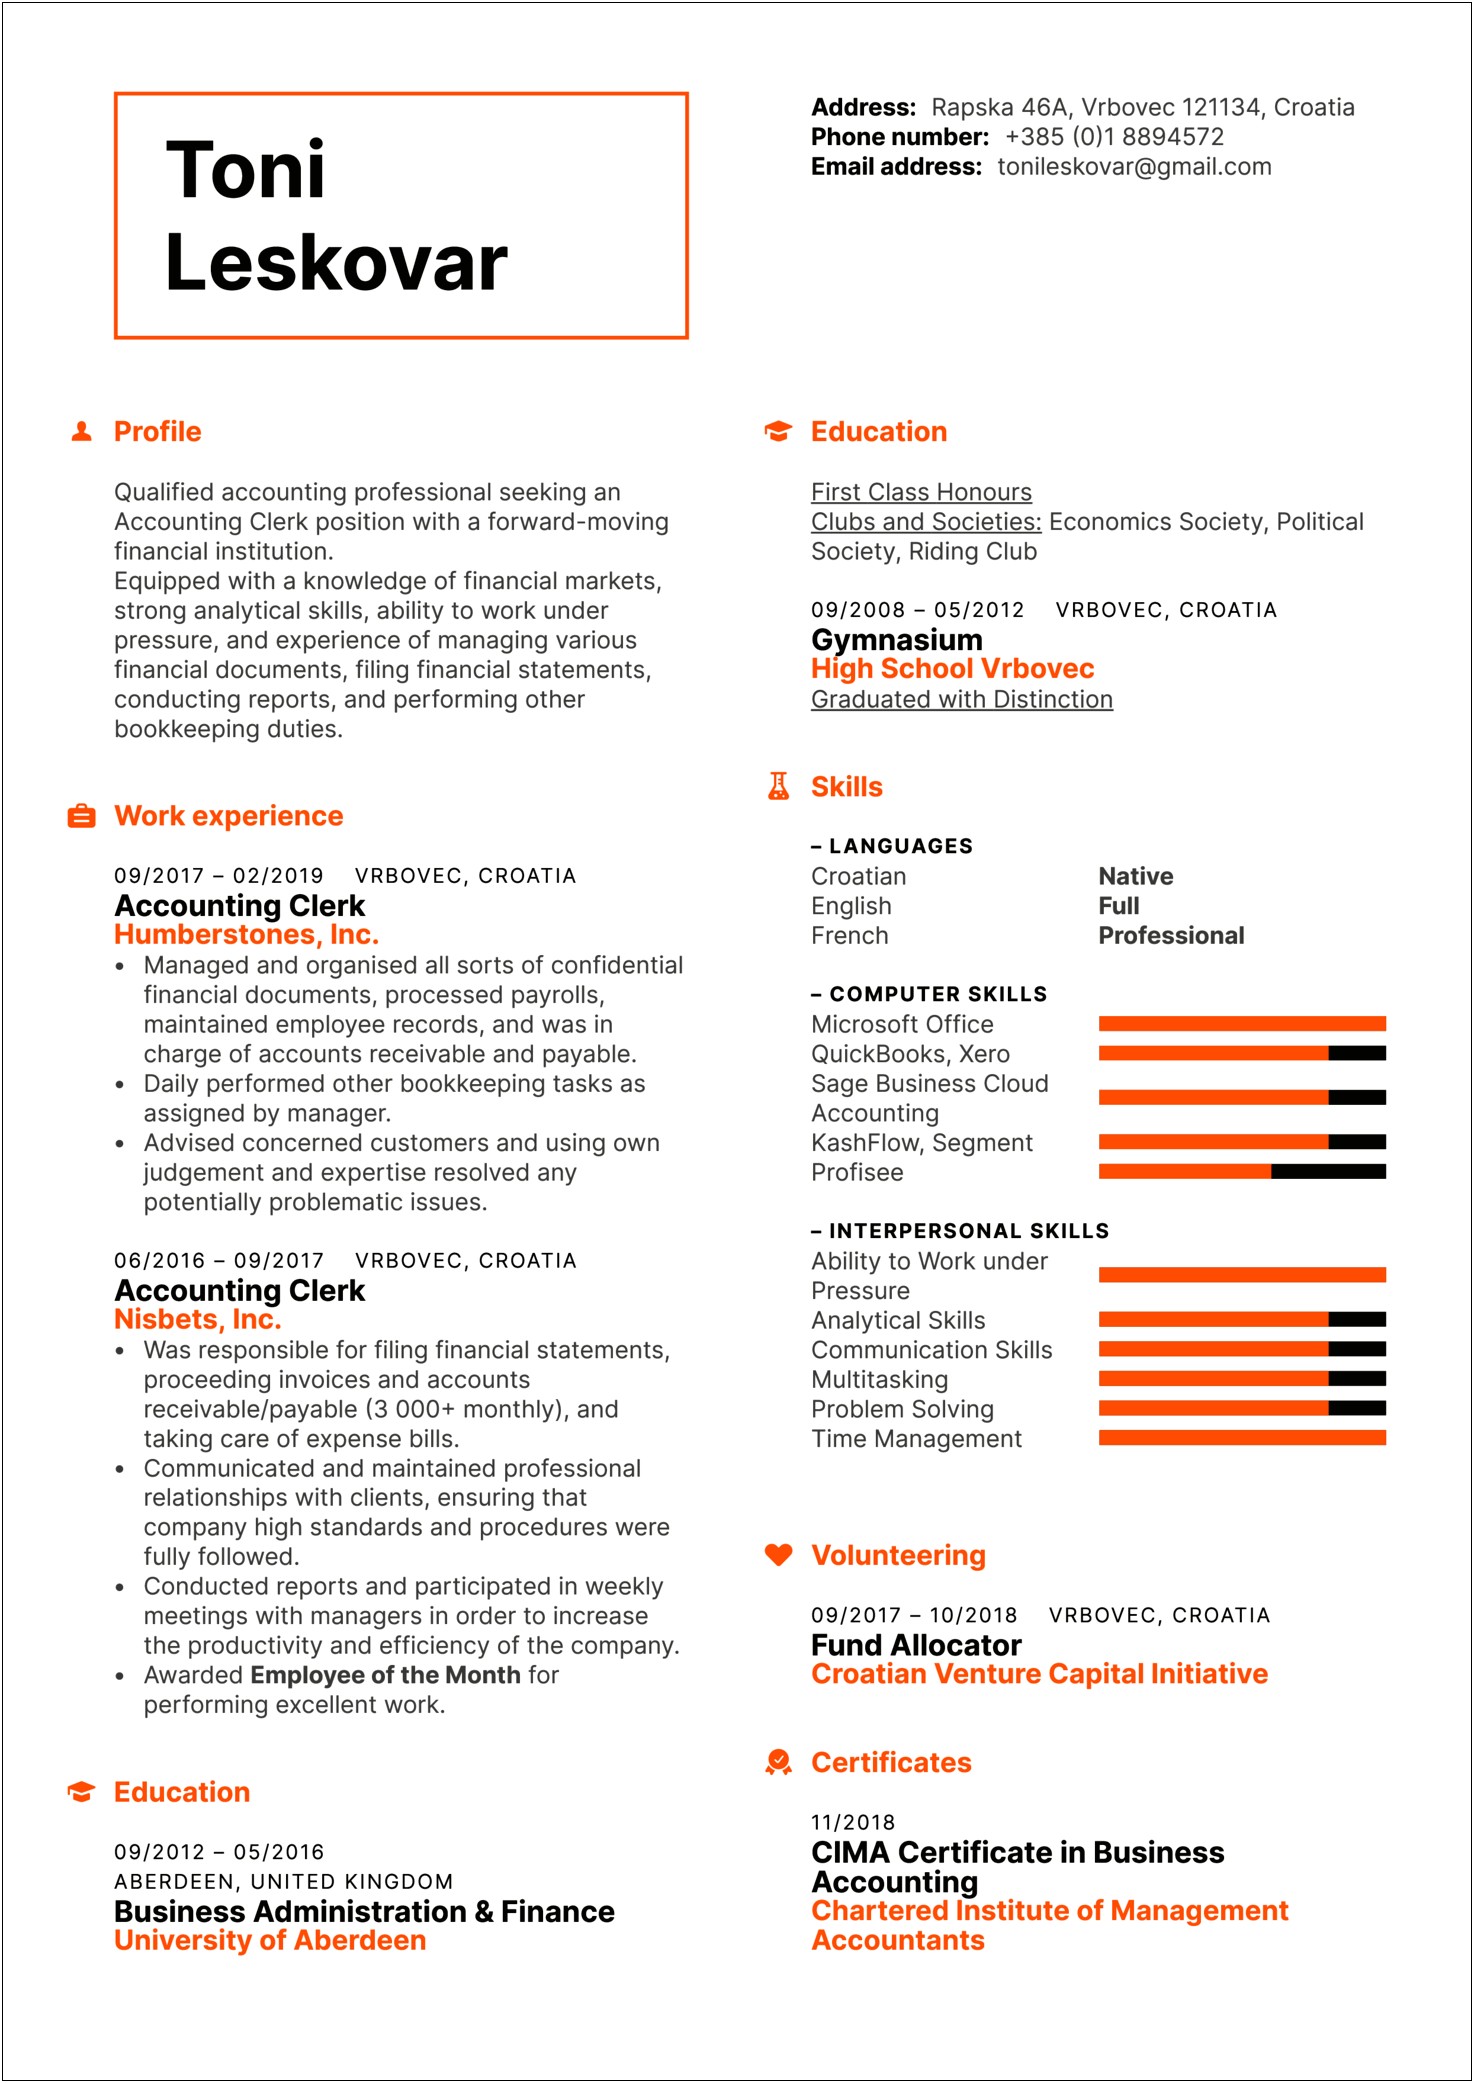 Resume Summary Statememnt For Accounts Receivables